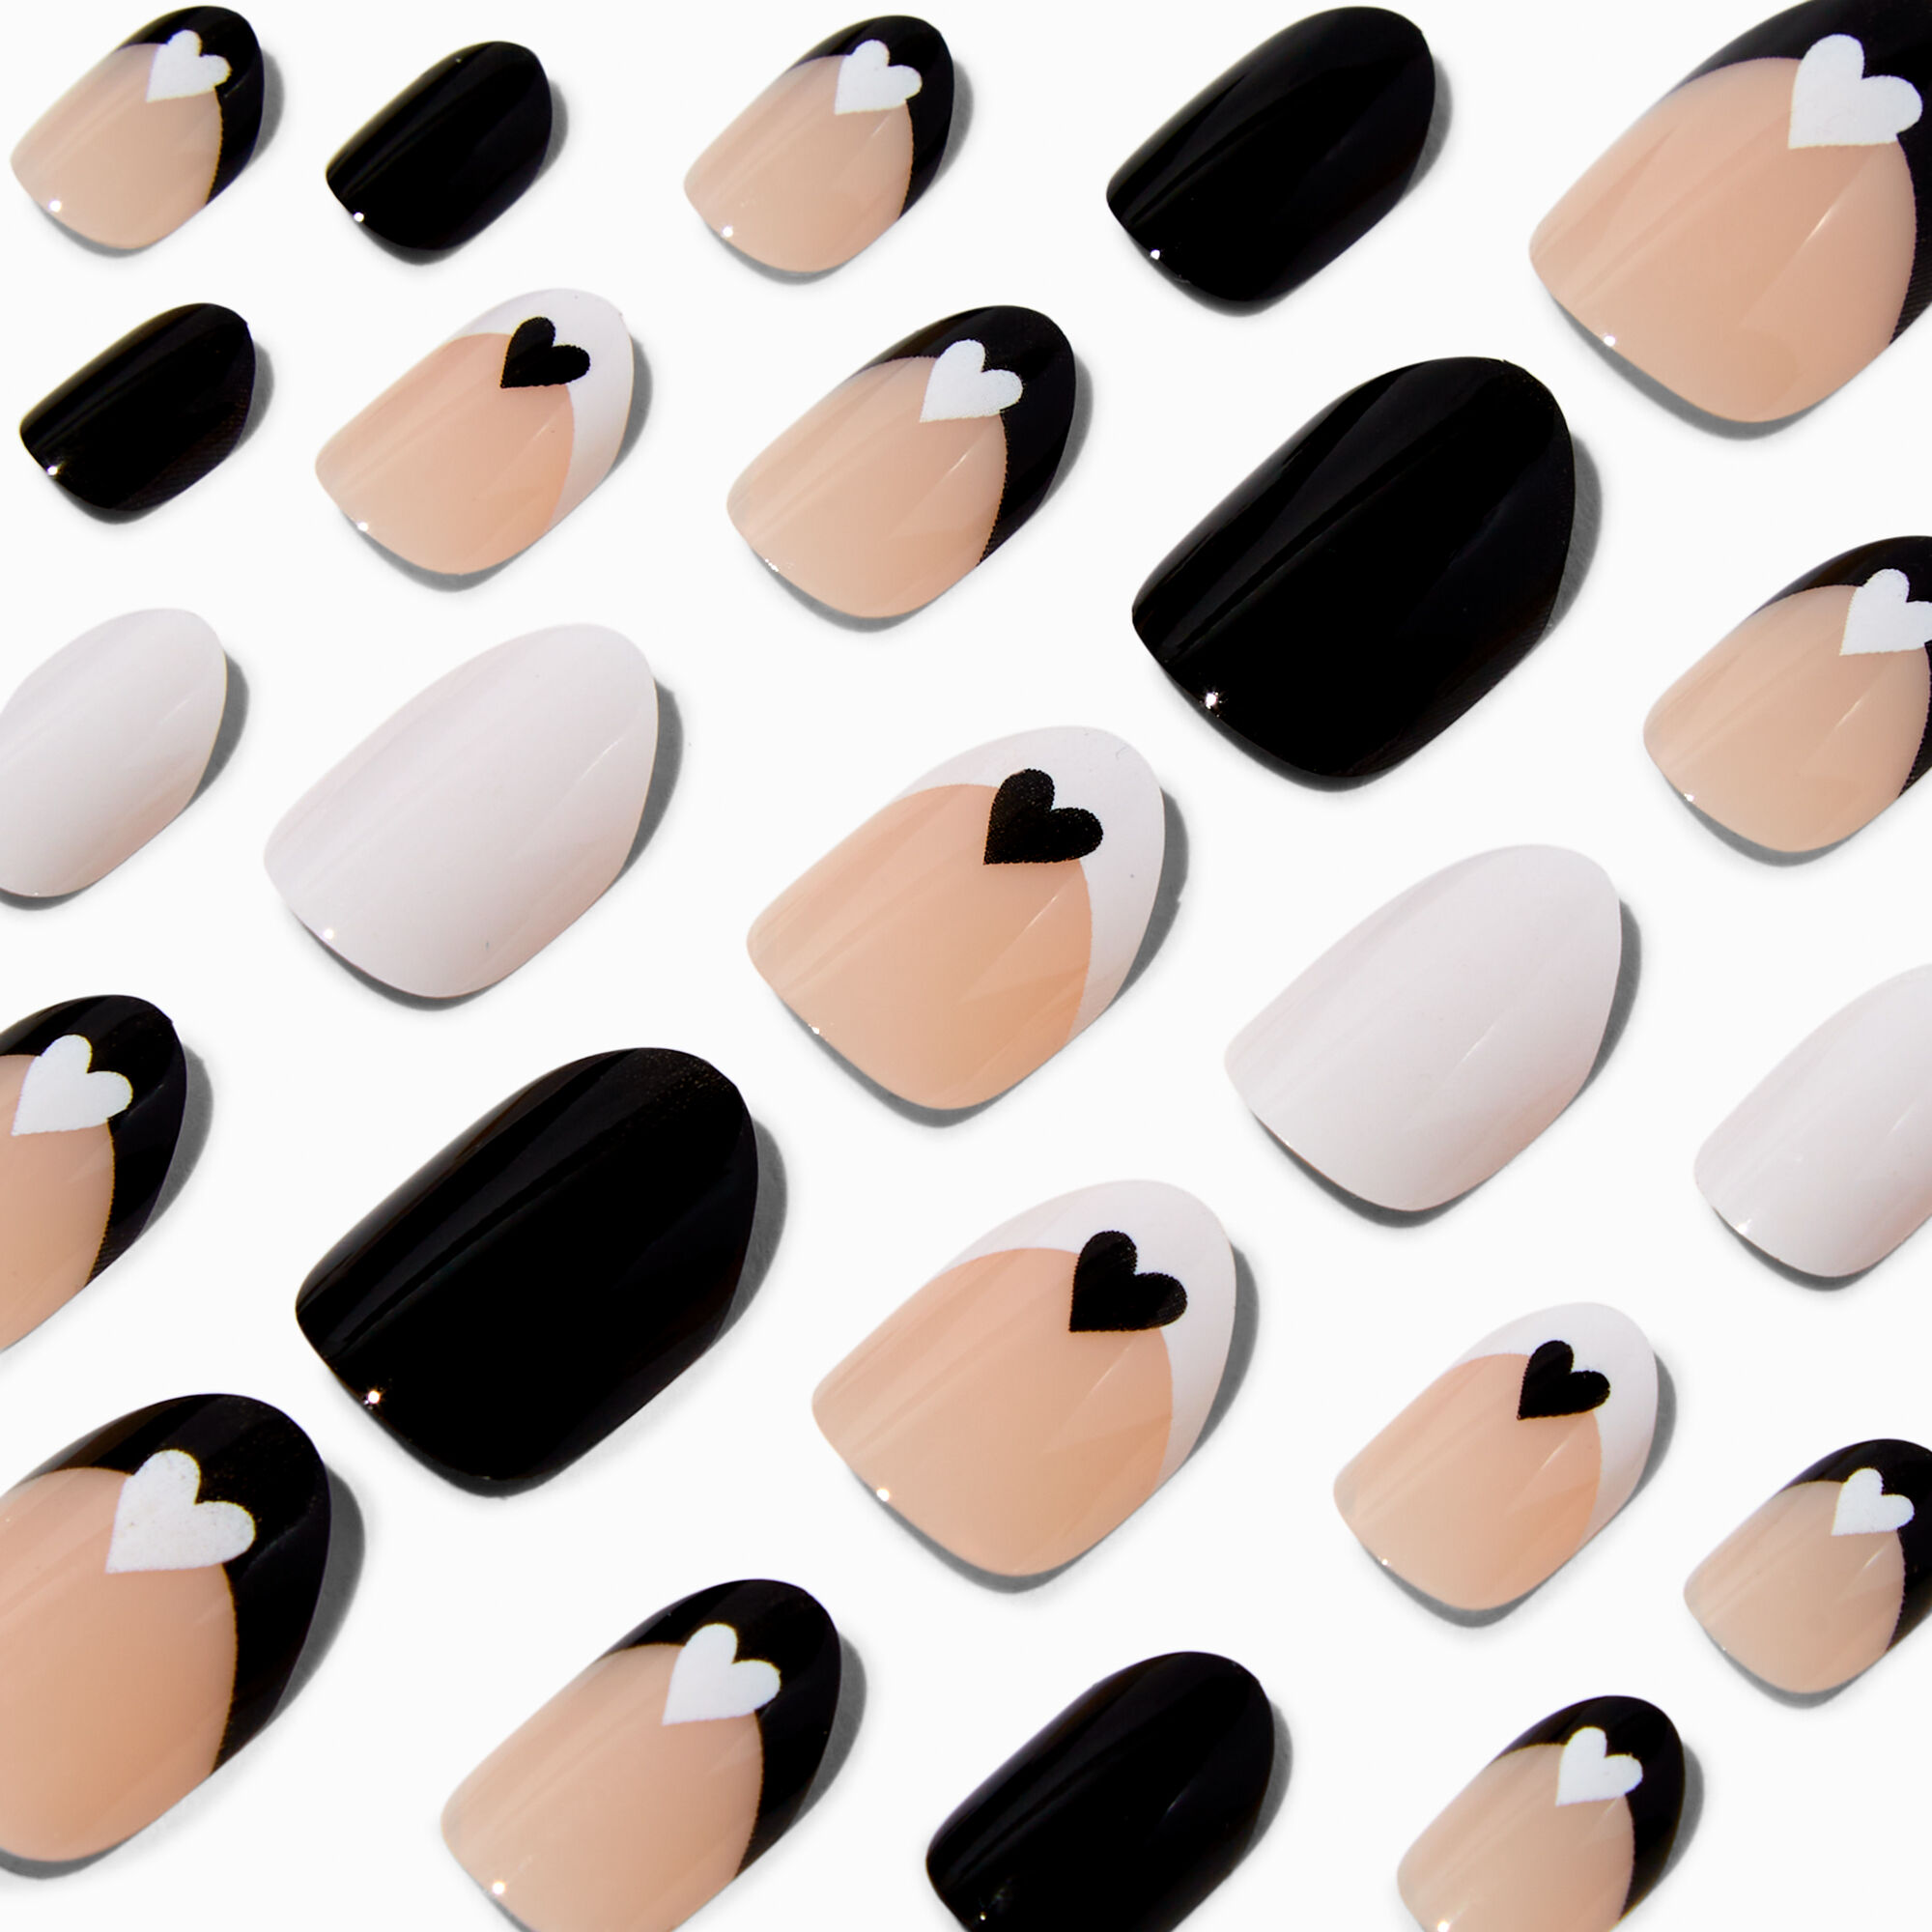 View Claires Black Hearts Round Vegan Press On Faux Nail Set 24 Pack White information